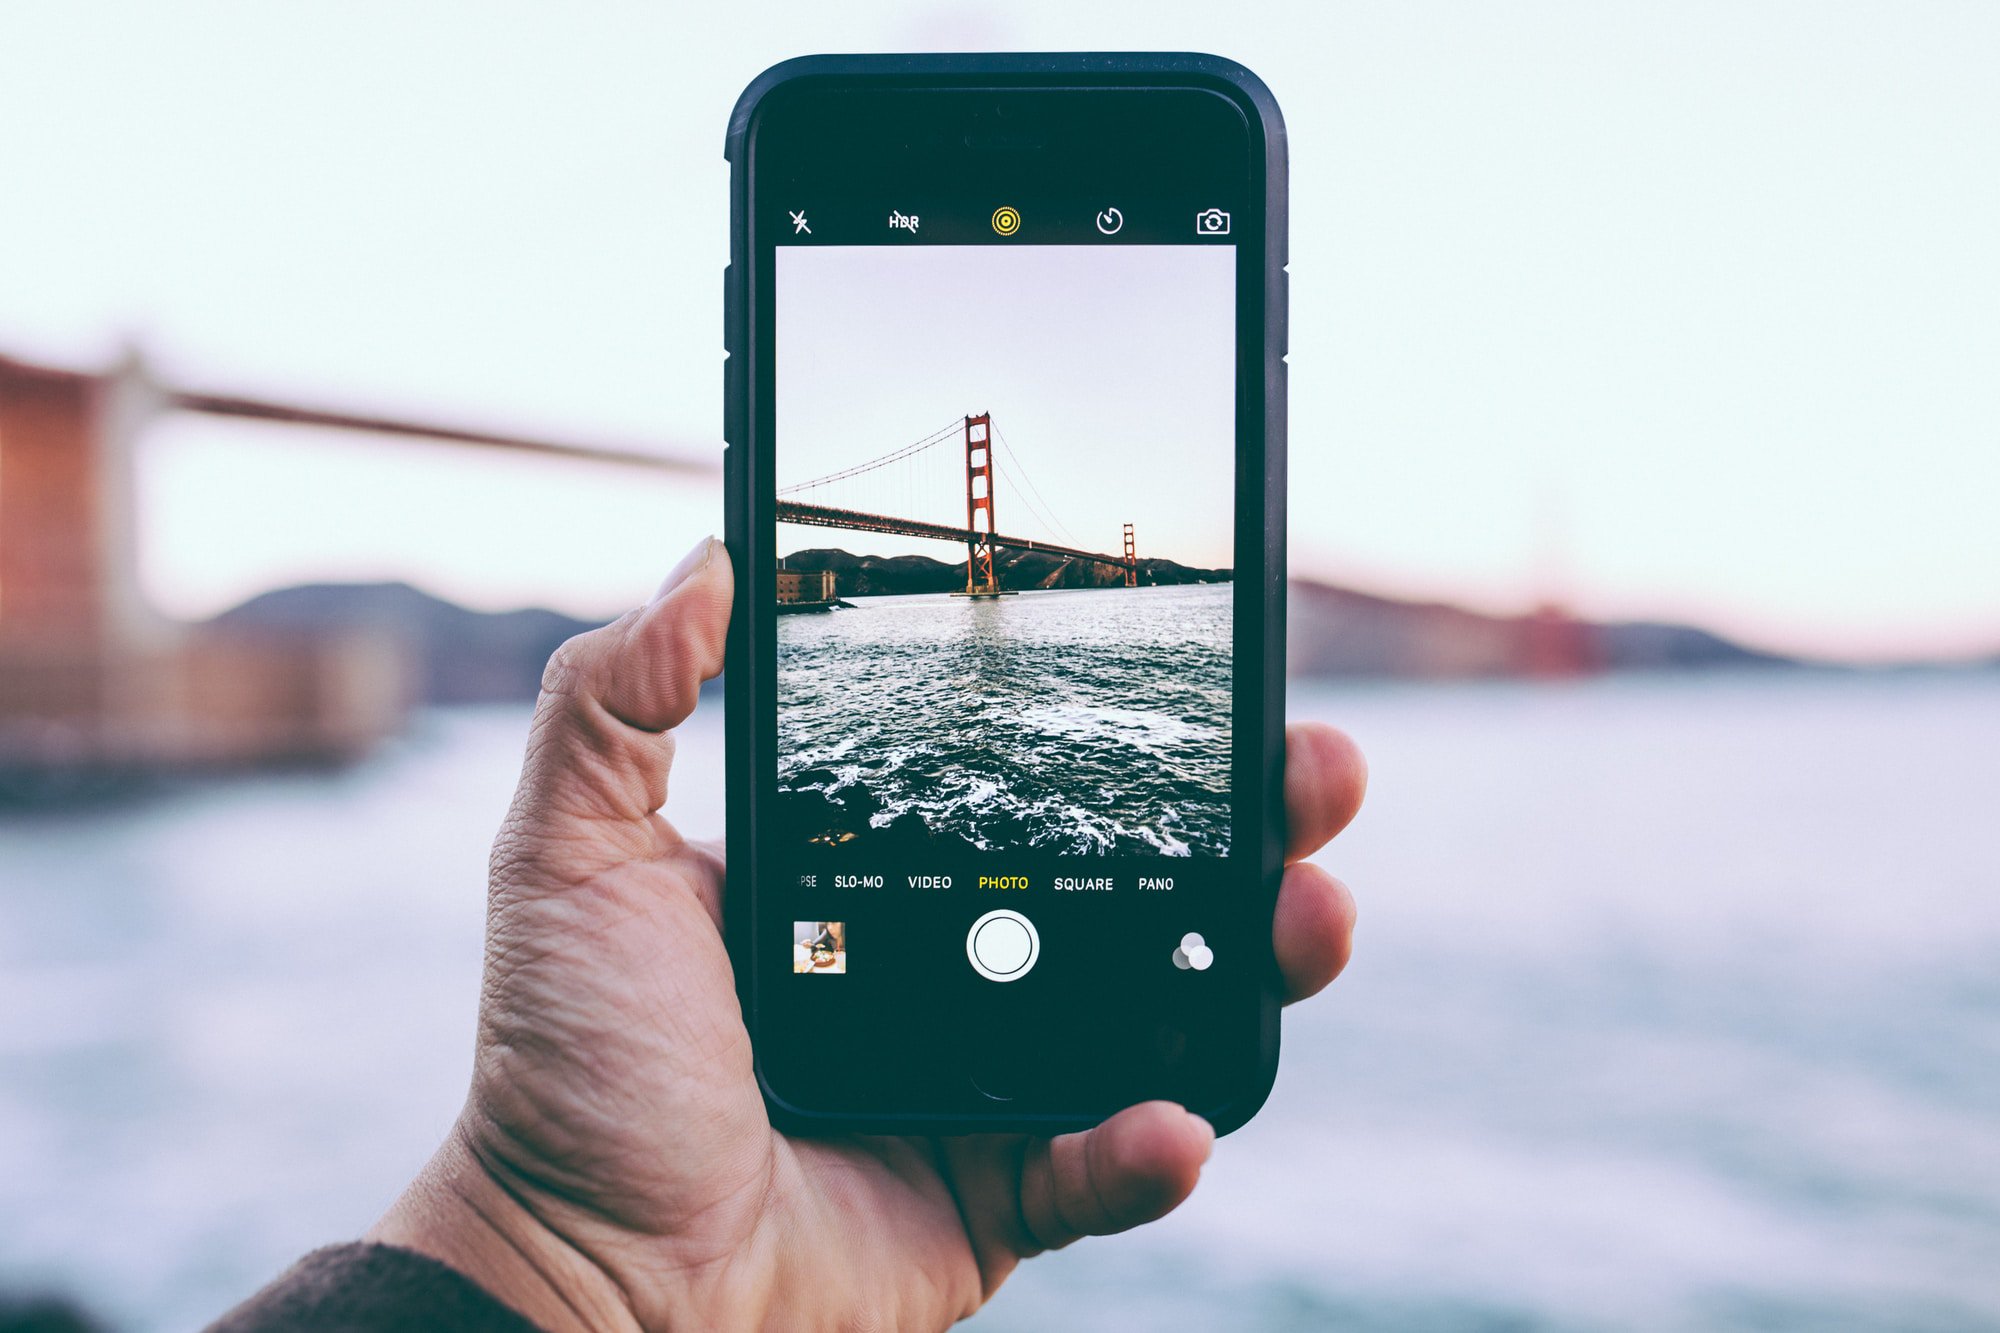 How to make a video your background live wallpaper on your devices